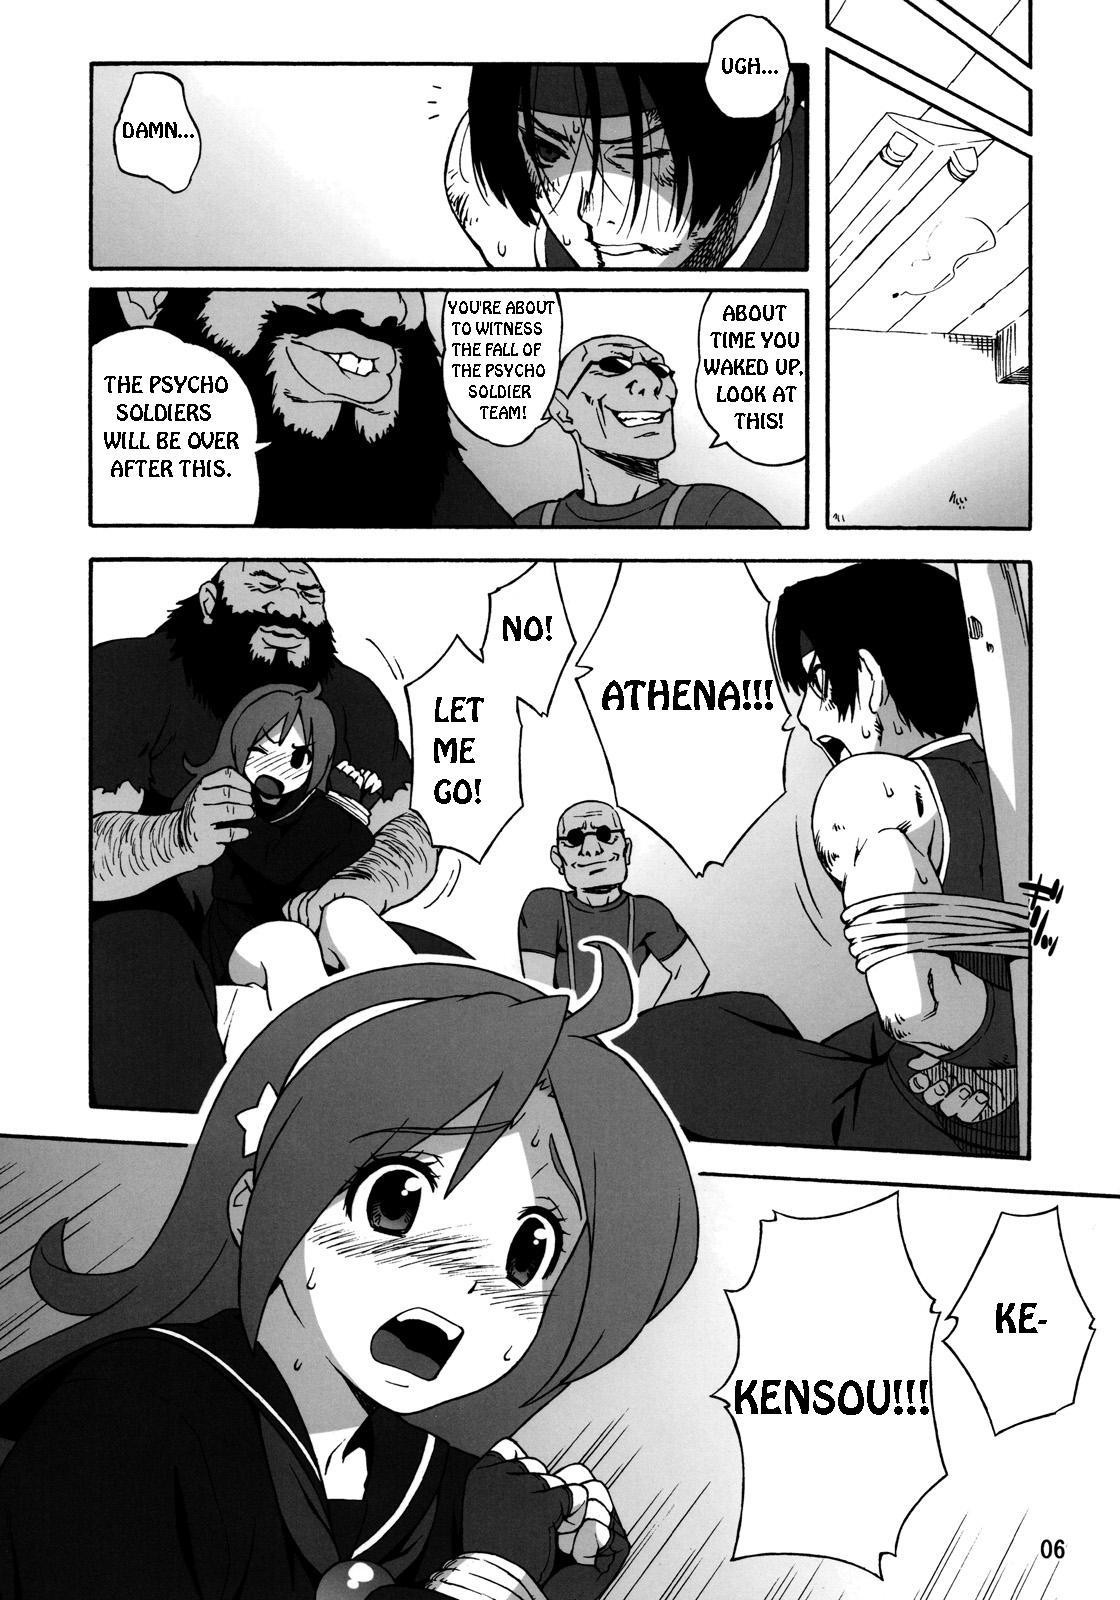 Lolicon A.N.T.R. - King of fighters Magrinha - Page 5